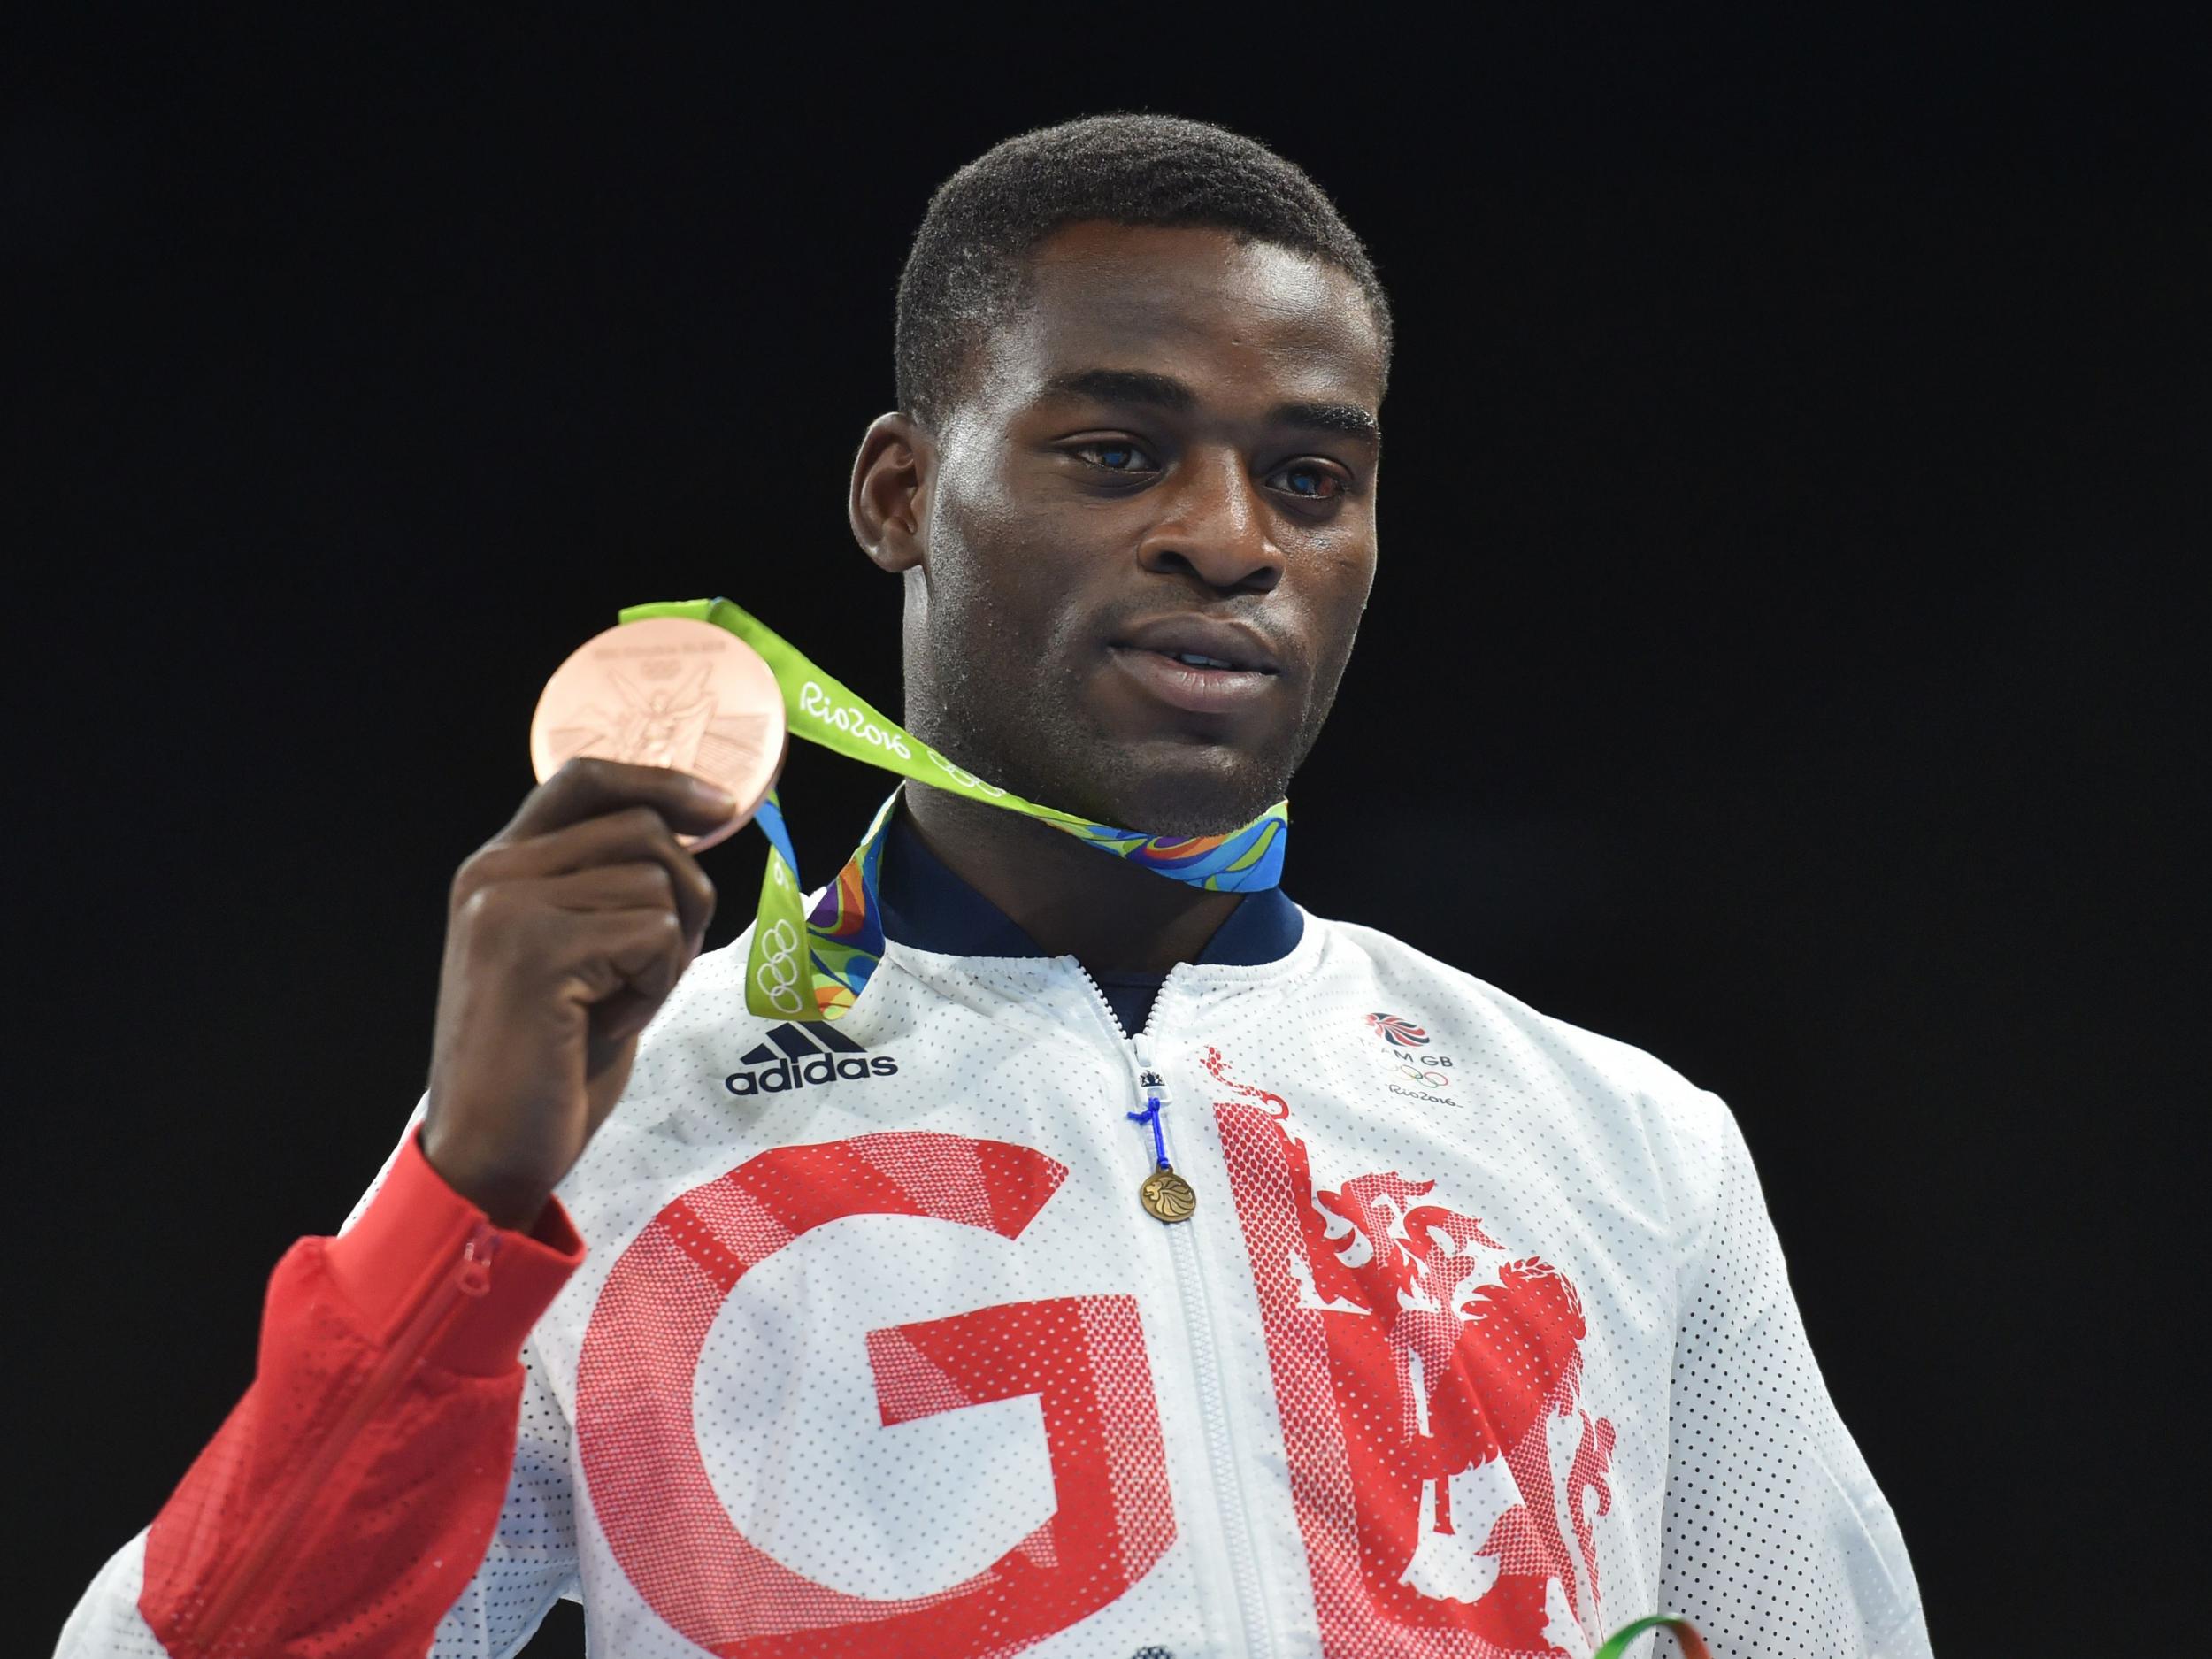 Buatsi has been out of the ring for 11 months since winning bronze in Rio last year